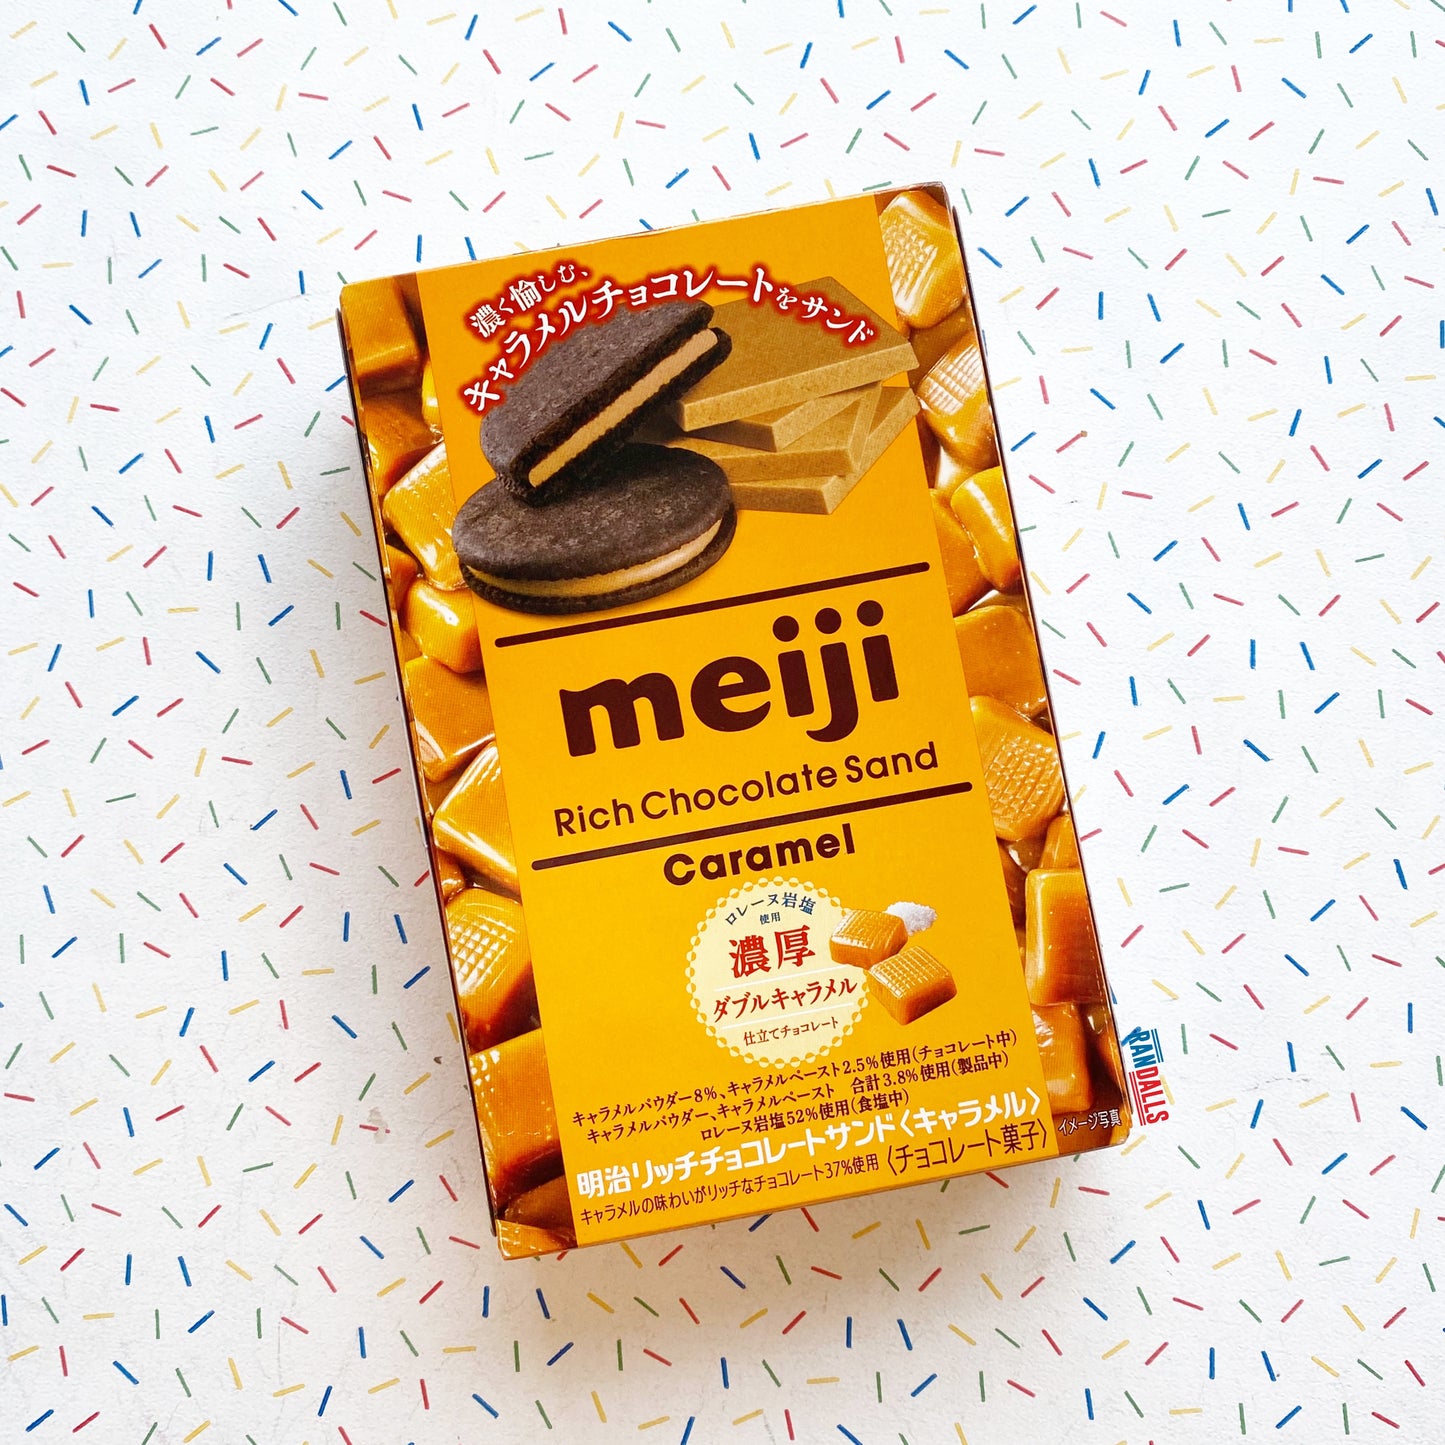 meiji rich caramel chocolate biscuits, japan, japanese, oreo, cookie, biscuits, randalls